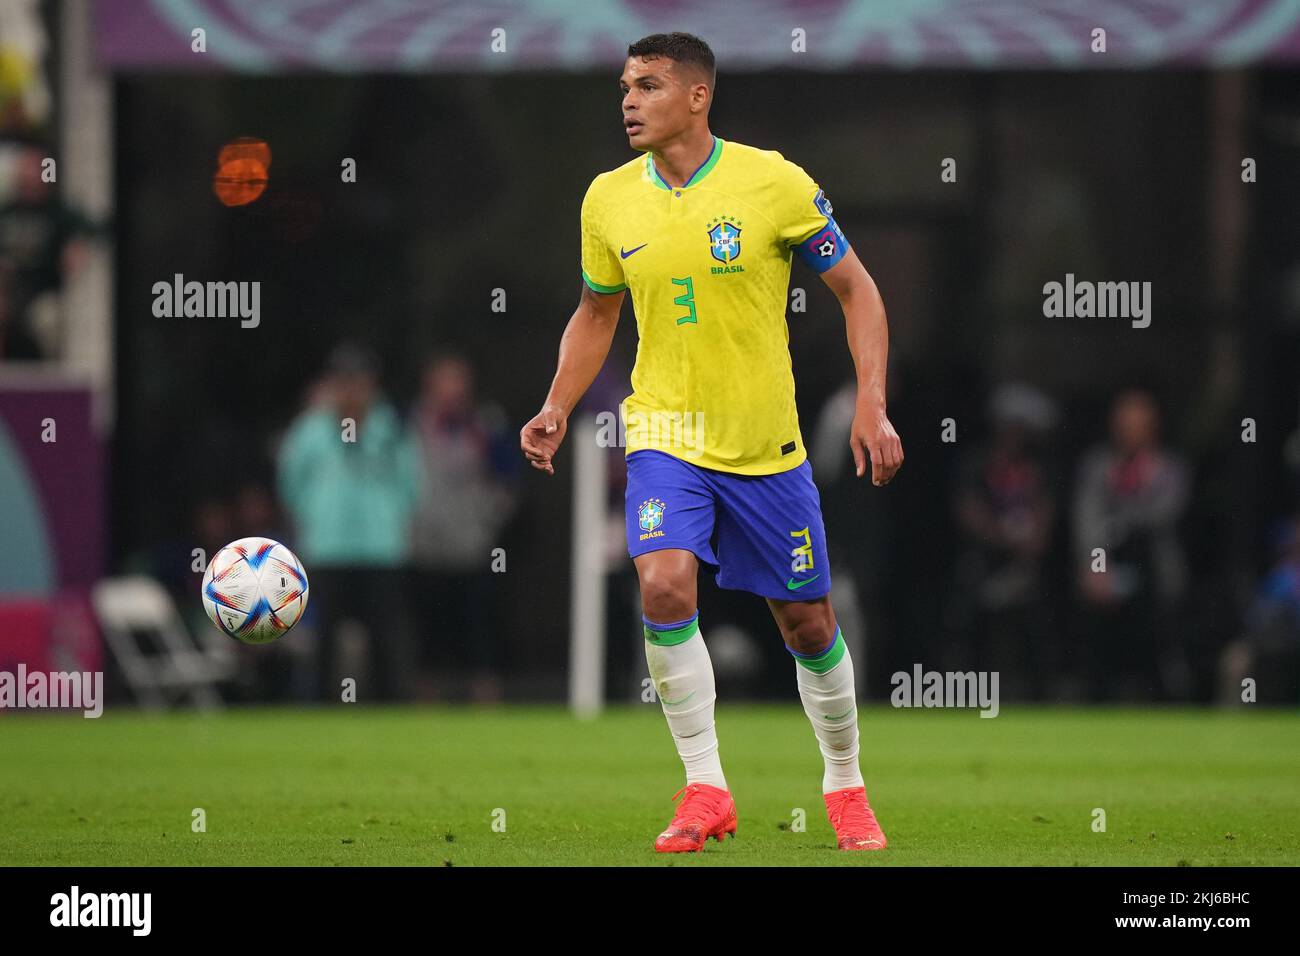 Thiago Silva of Brazil during the FIFA World Cup Qatar 2022 match, Group G, between Brazil and Serbia played at Lusail Stadium on Nov 24, 2022 in Lusail, Qatar. (Photo by Bagu Blanco / PRESSIN) Credit: PRESSINPHOTO SPORTS AGENCY/Alamy Live News Stock Photo